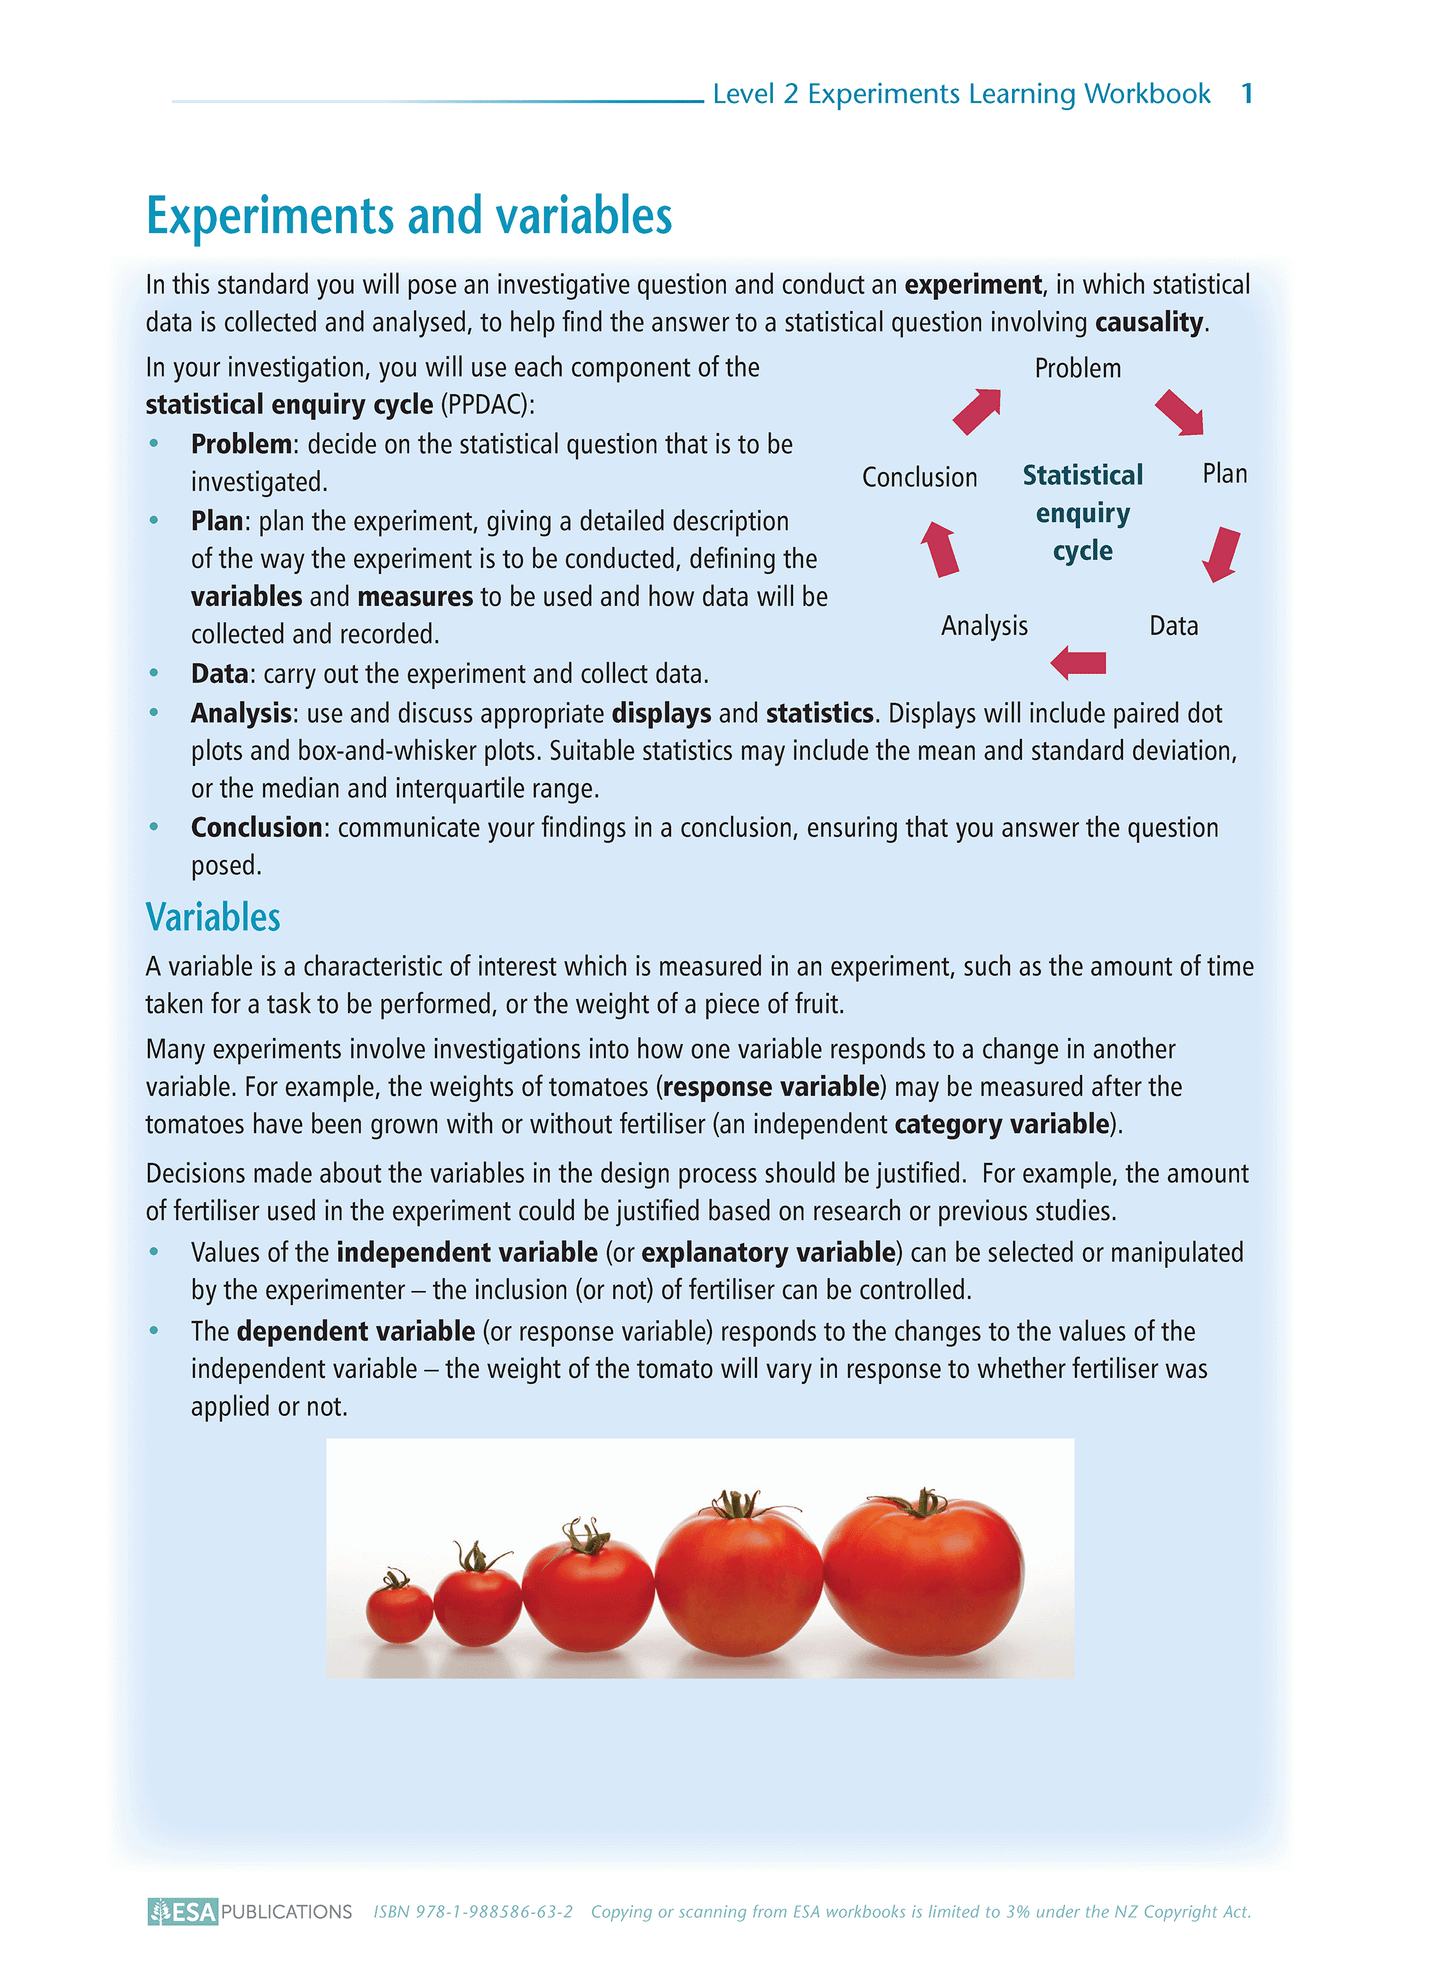 Level 2 Experiments 2.10 Learning Workbook